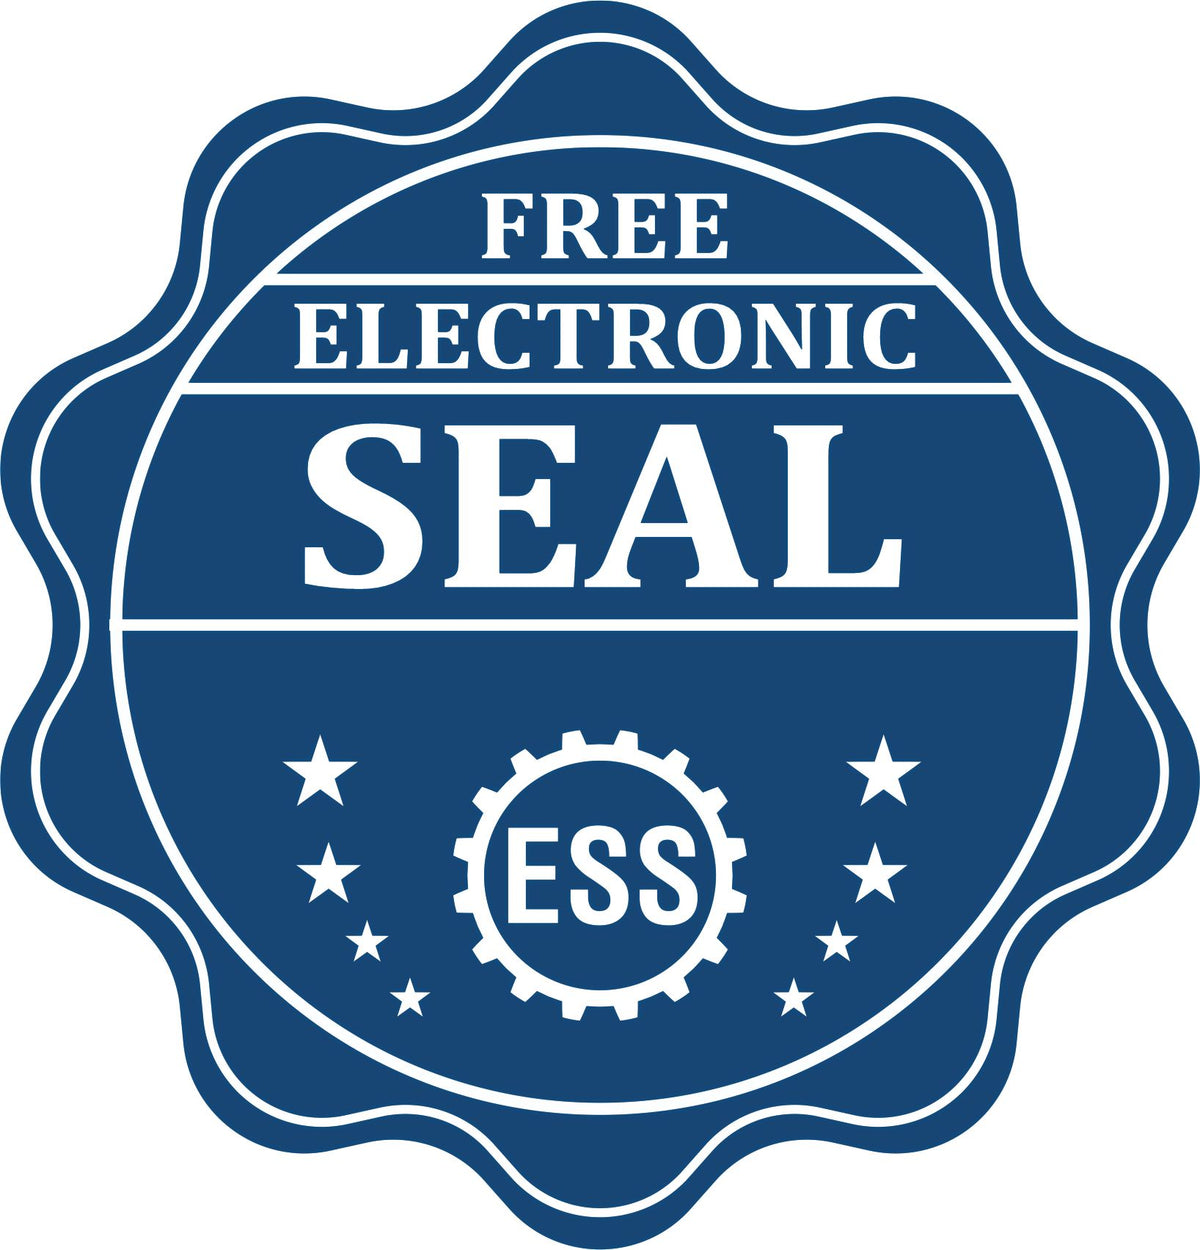 A badge showing a free electronic seal for the Slim Pre-Inked Washington Professional Engineer Seal Stamp with stars and the ESS gear on the emblem.